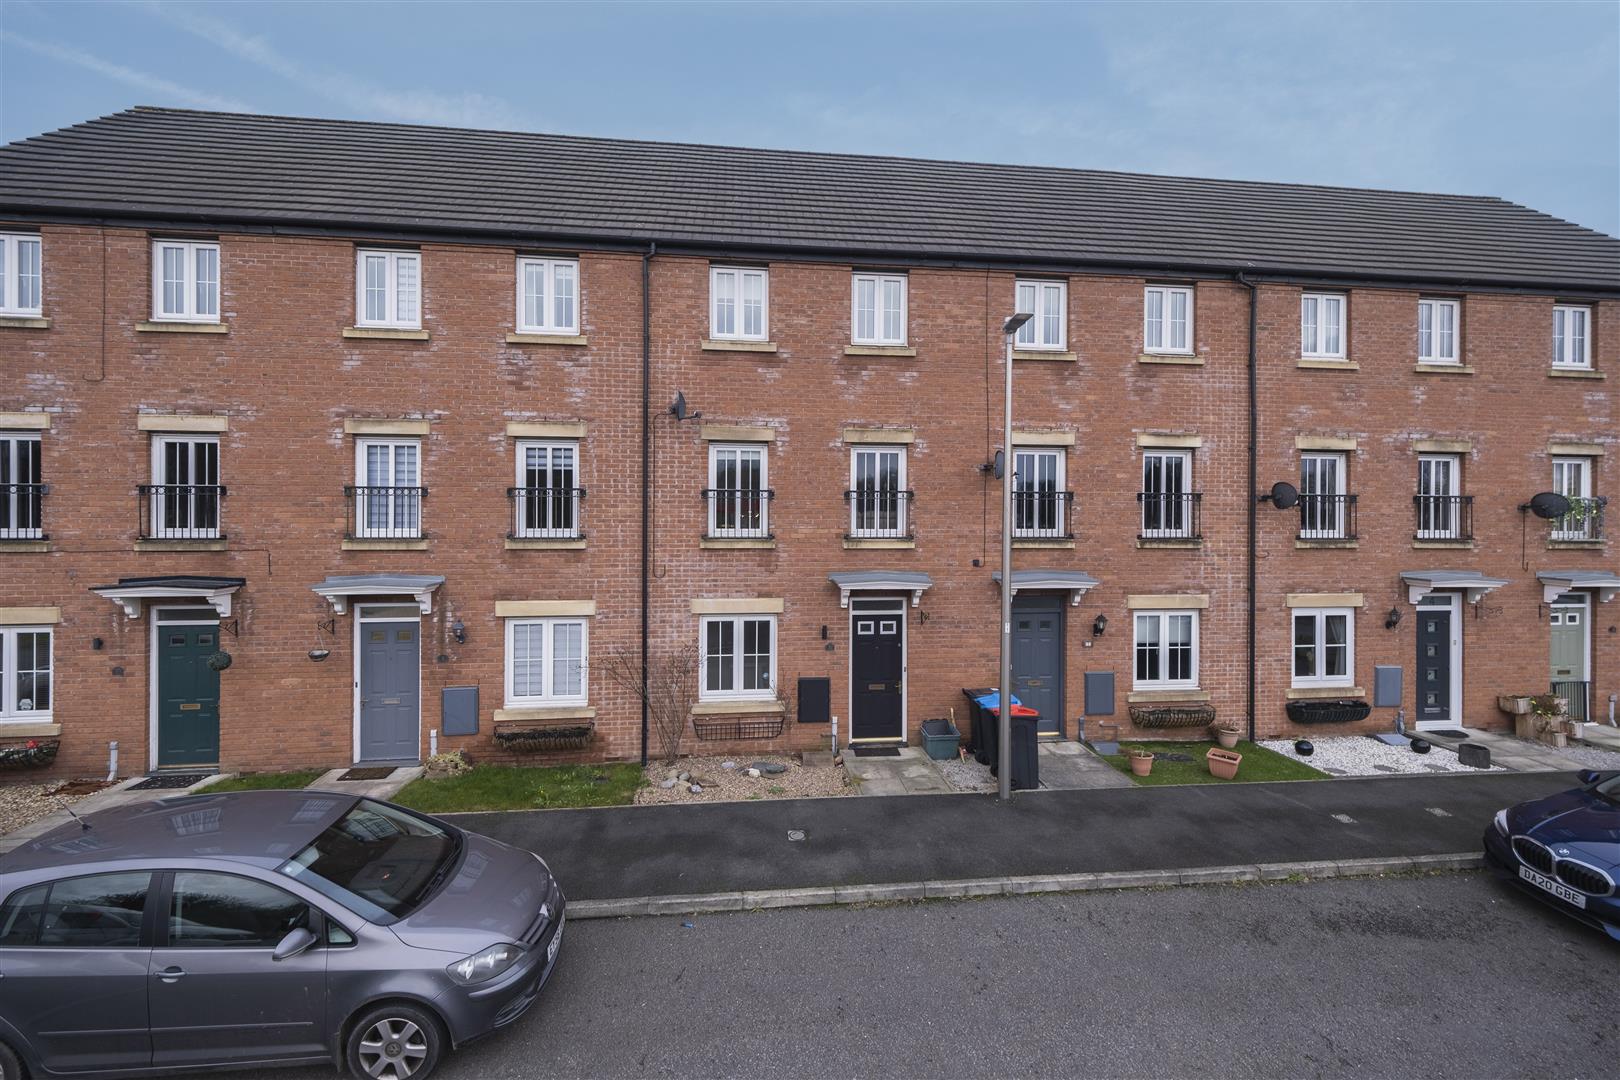 4 bedroom  Terraced House for Sale in Northwich